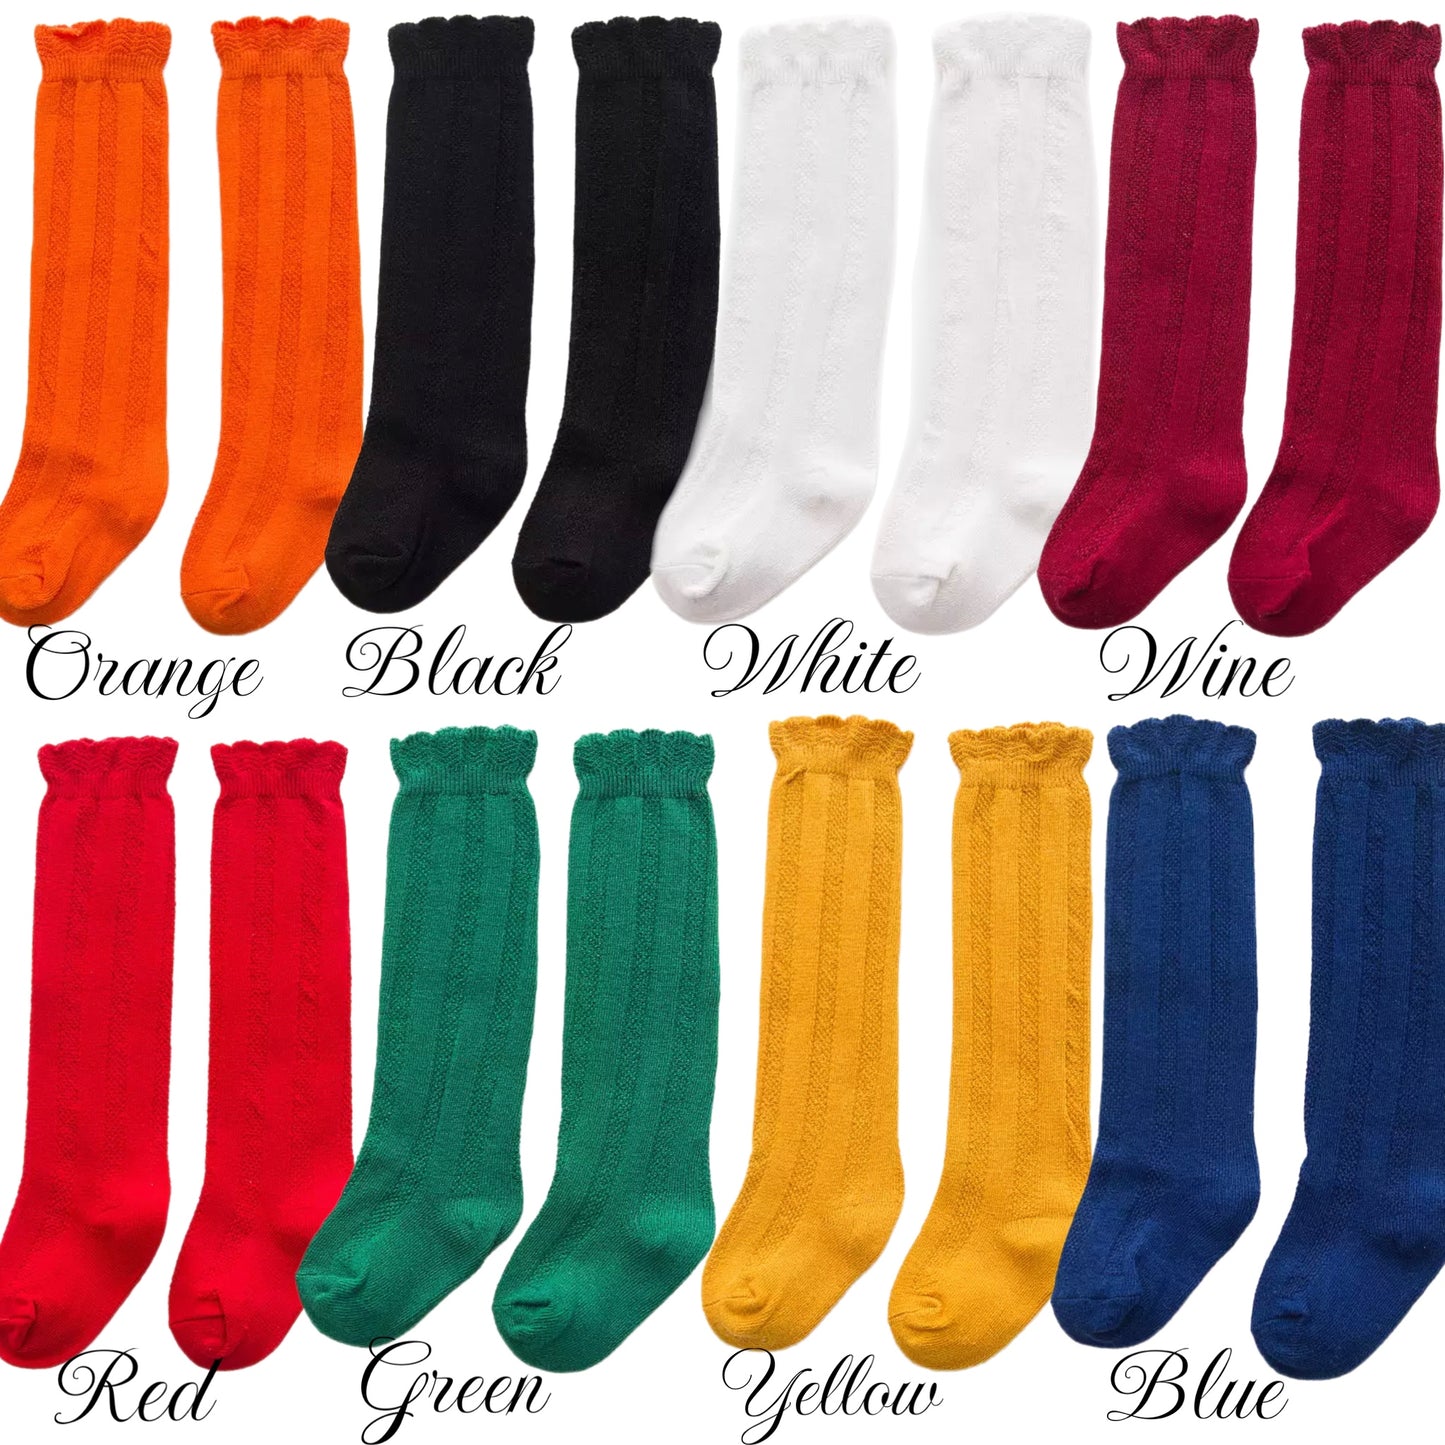 PREORDER Scalloped Knee High Socks (8 colors) CLOSES 9/23